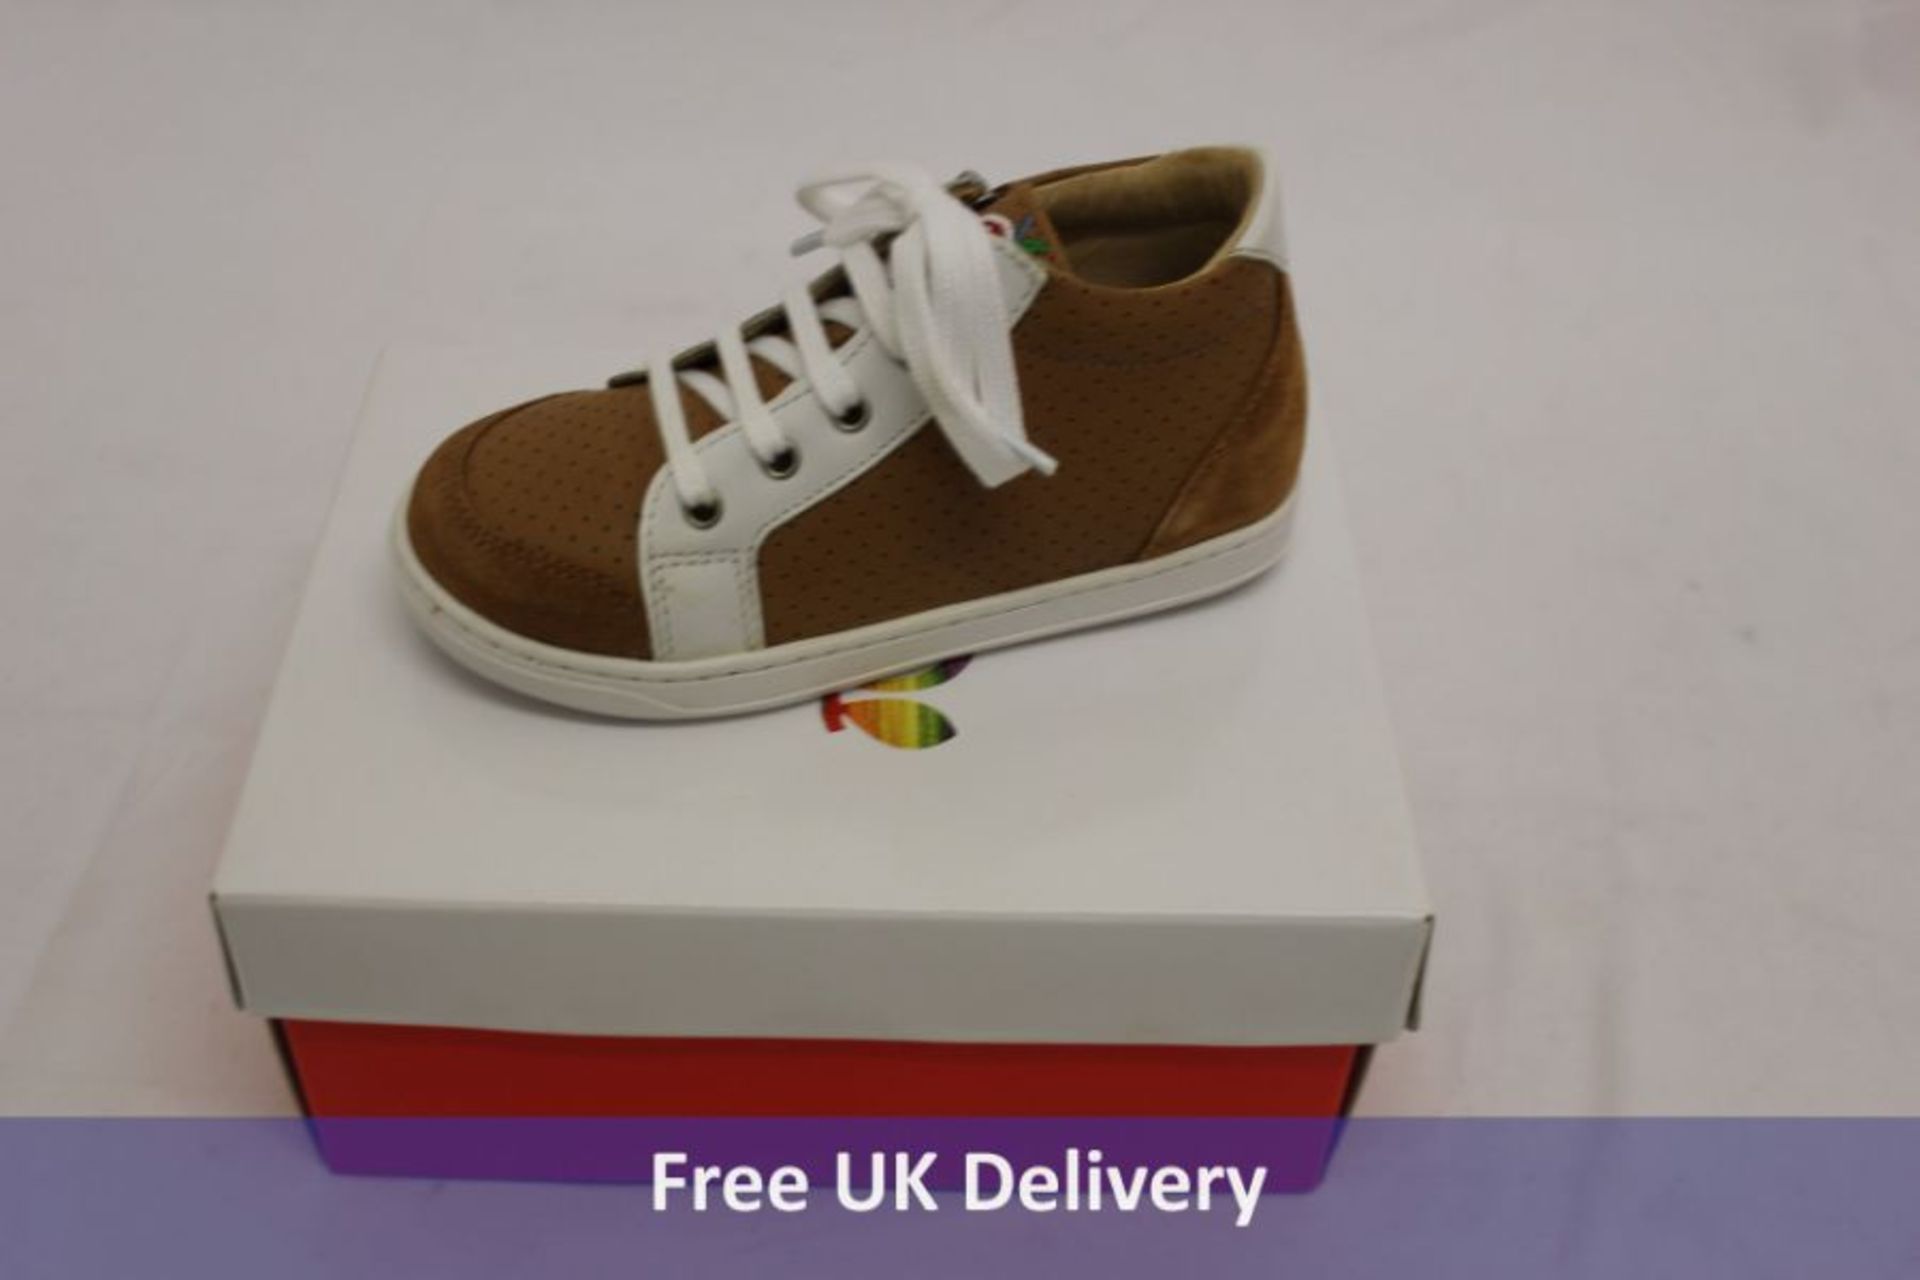 Two Pairs of Shoo Pom Bouba Zip Box Boys' Trainers, Camel/White, Size 27